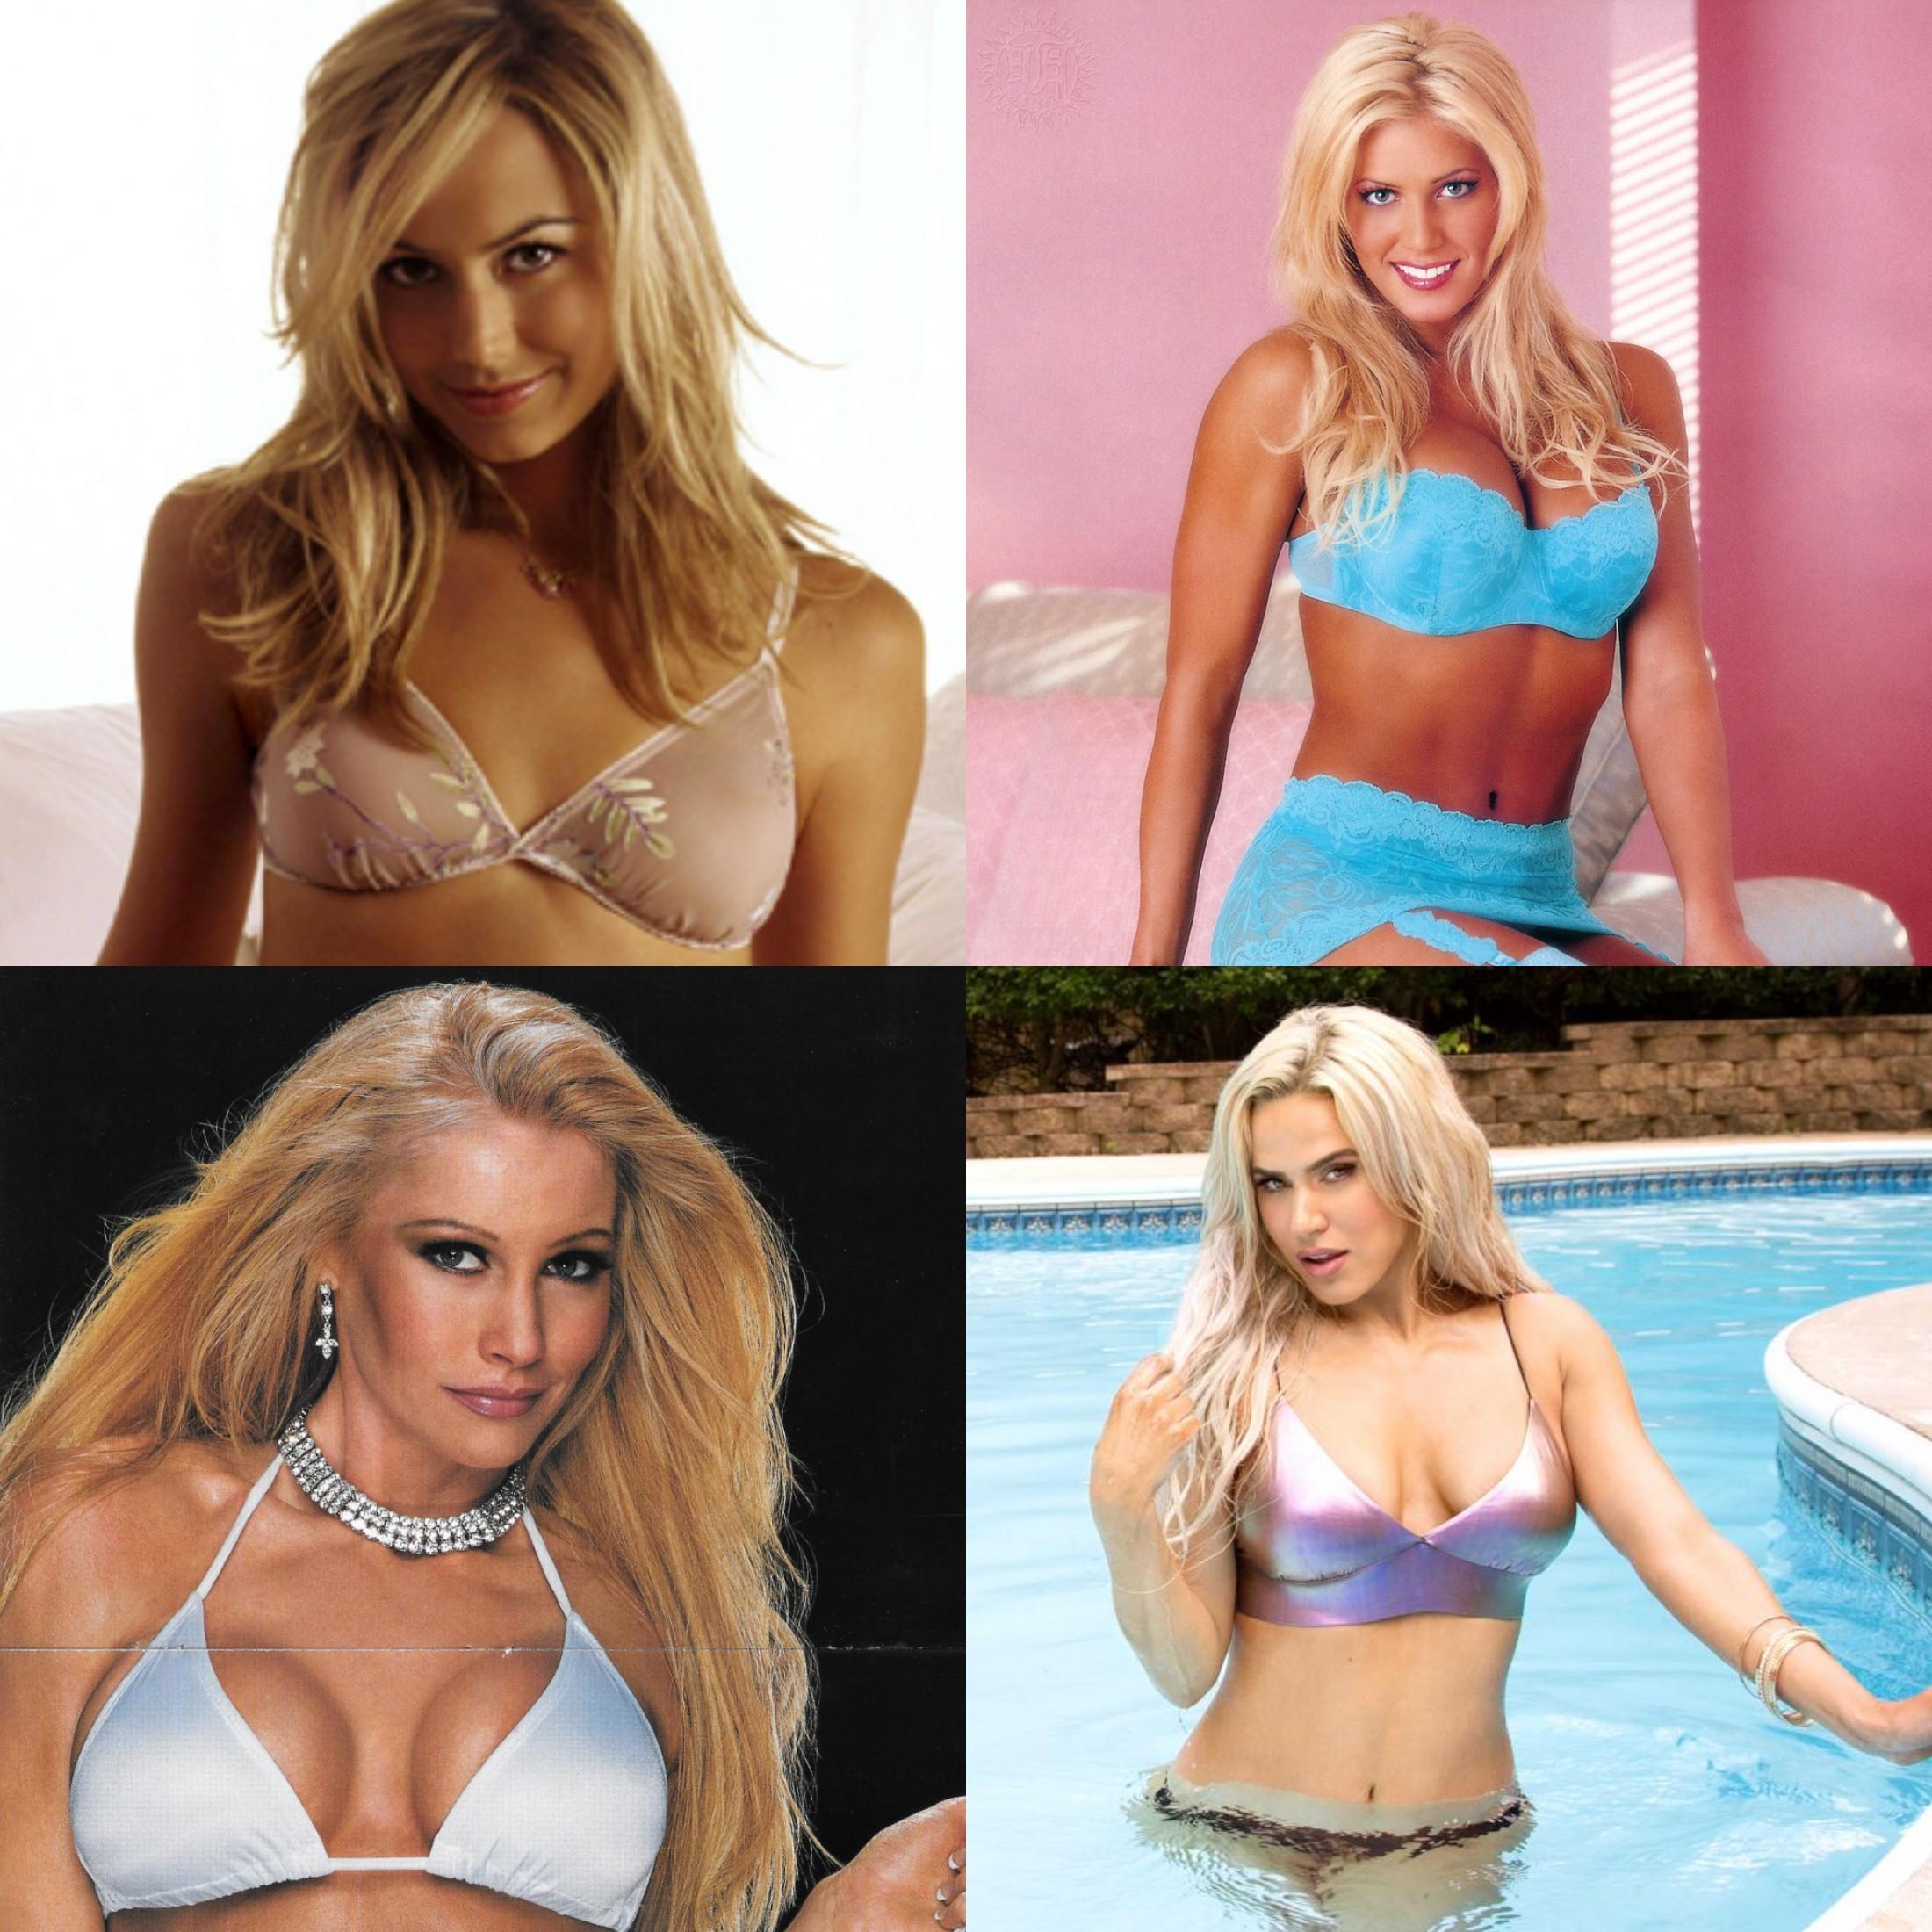 Hound D. recommendet torrie with Stacy bikini wilson keibler